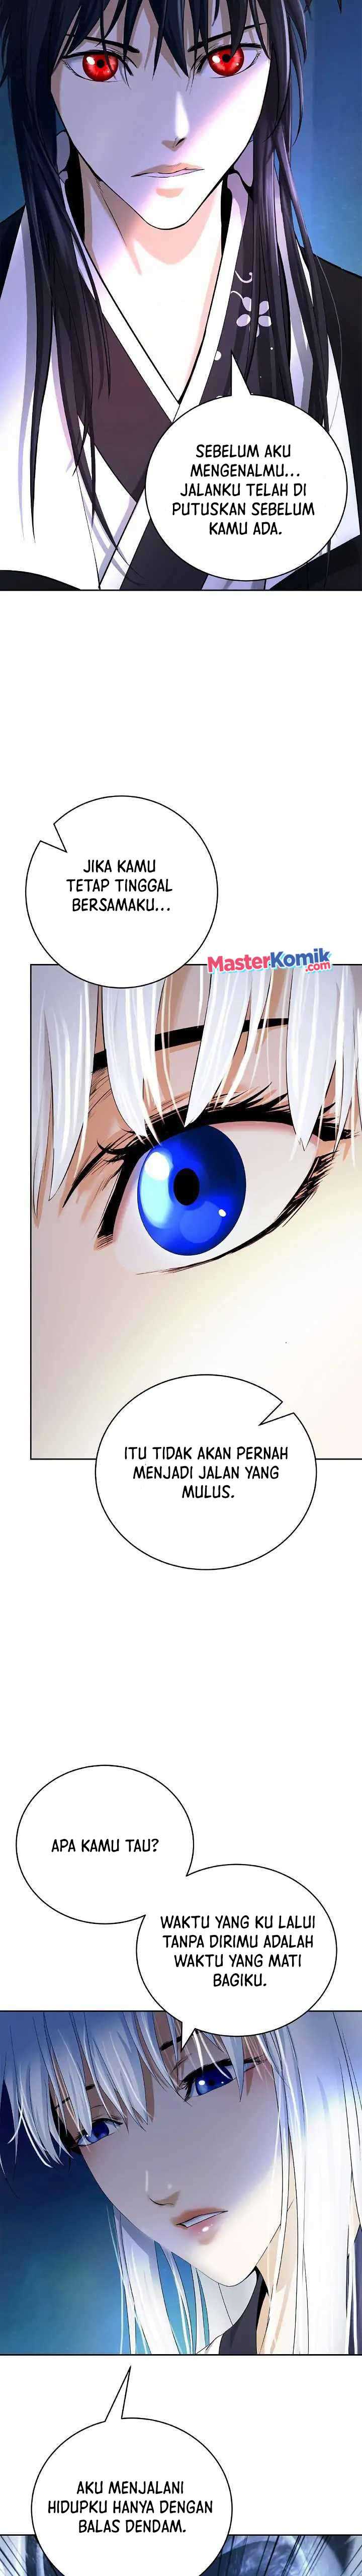 Cystic Story Chapter 85